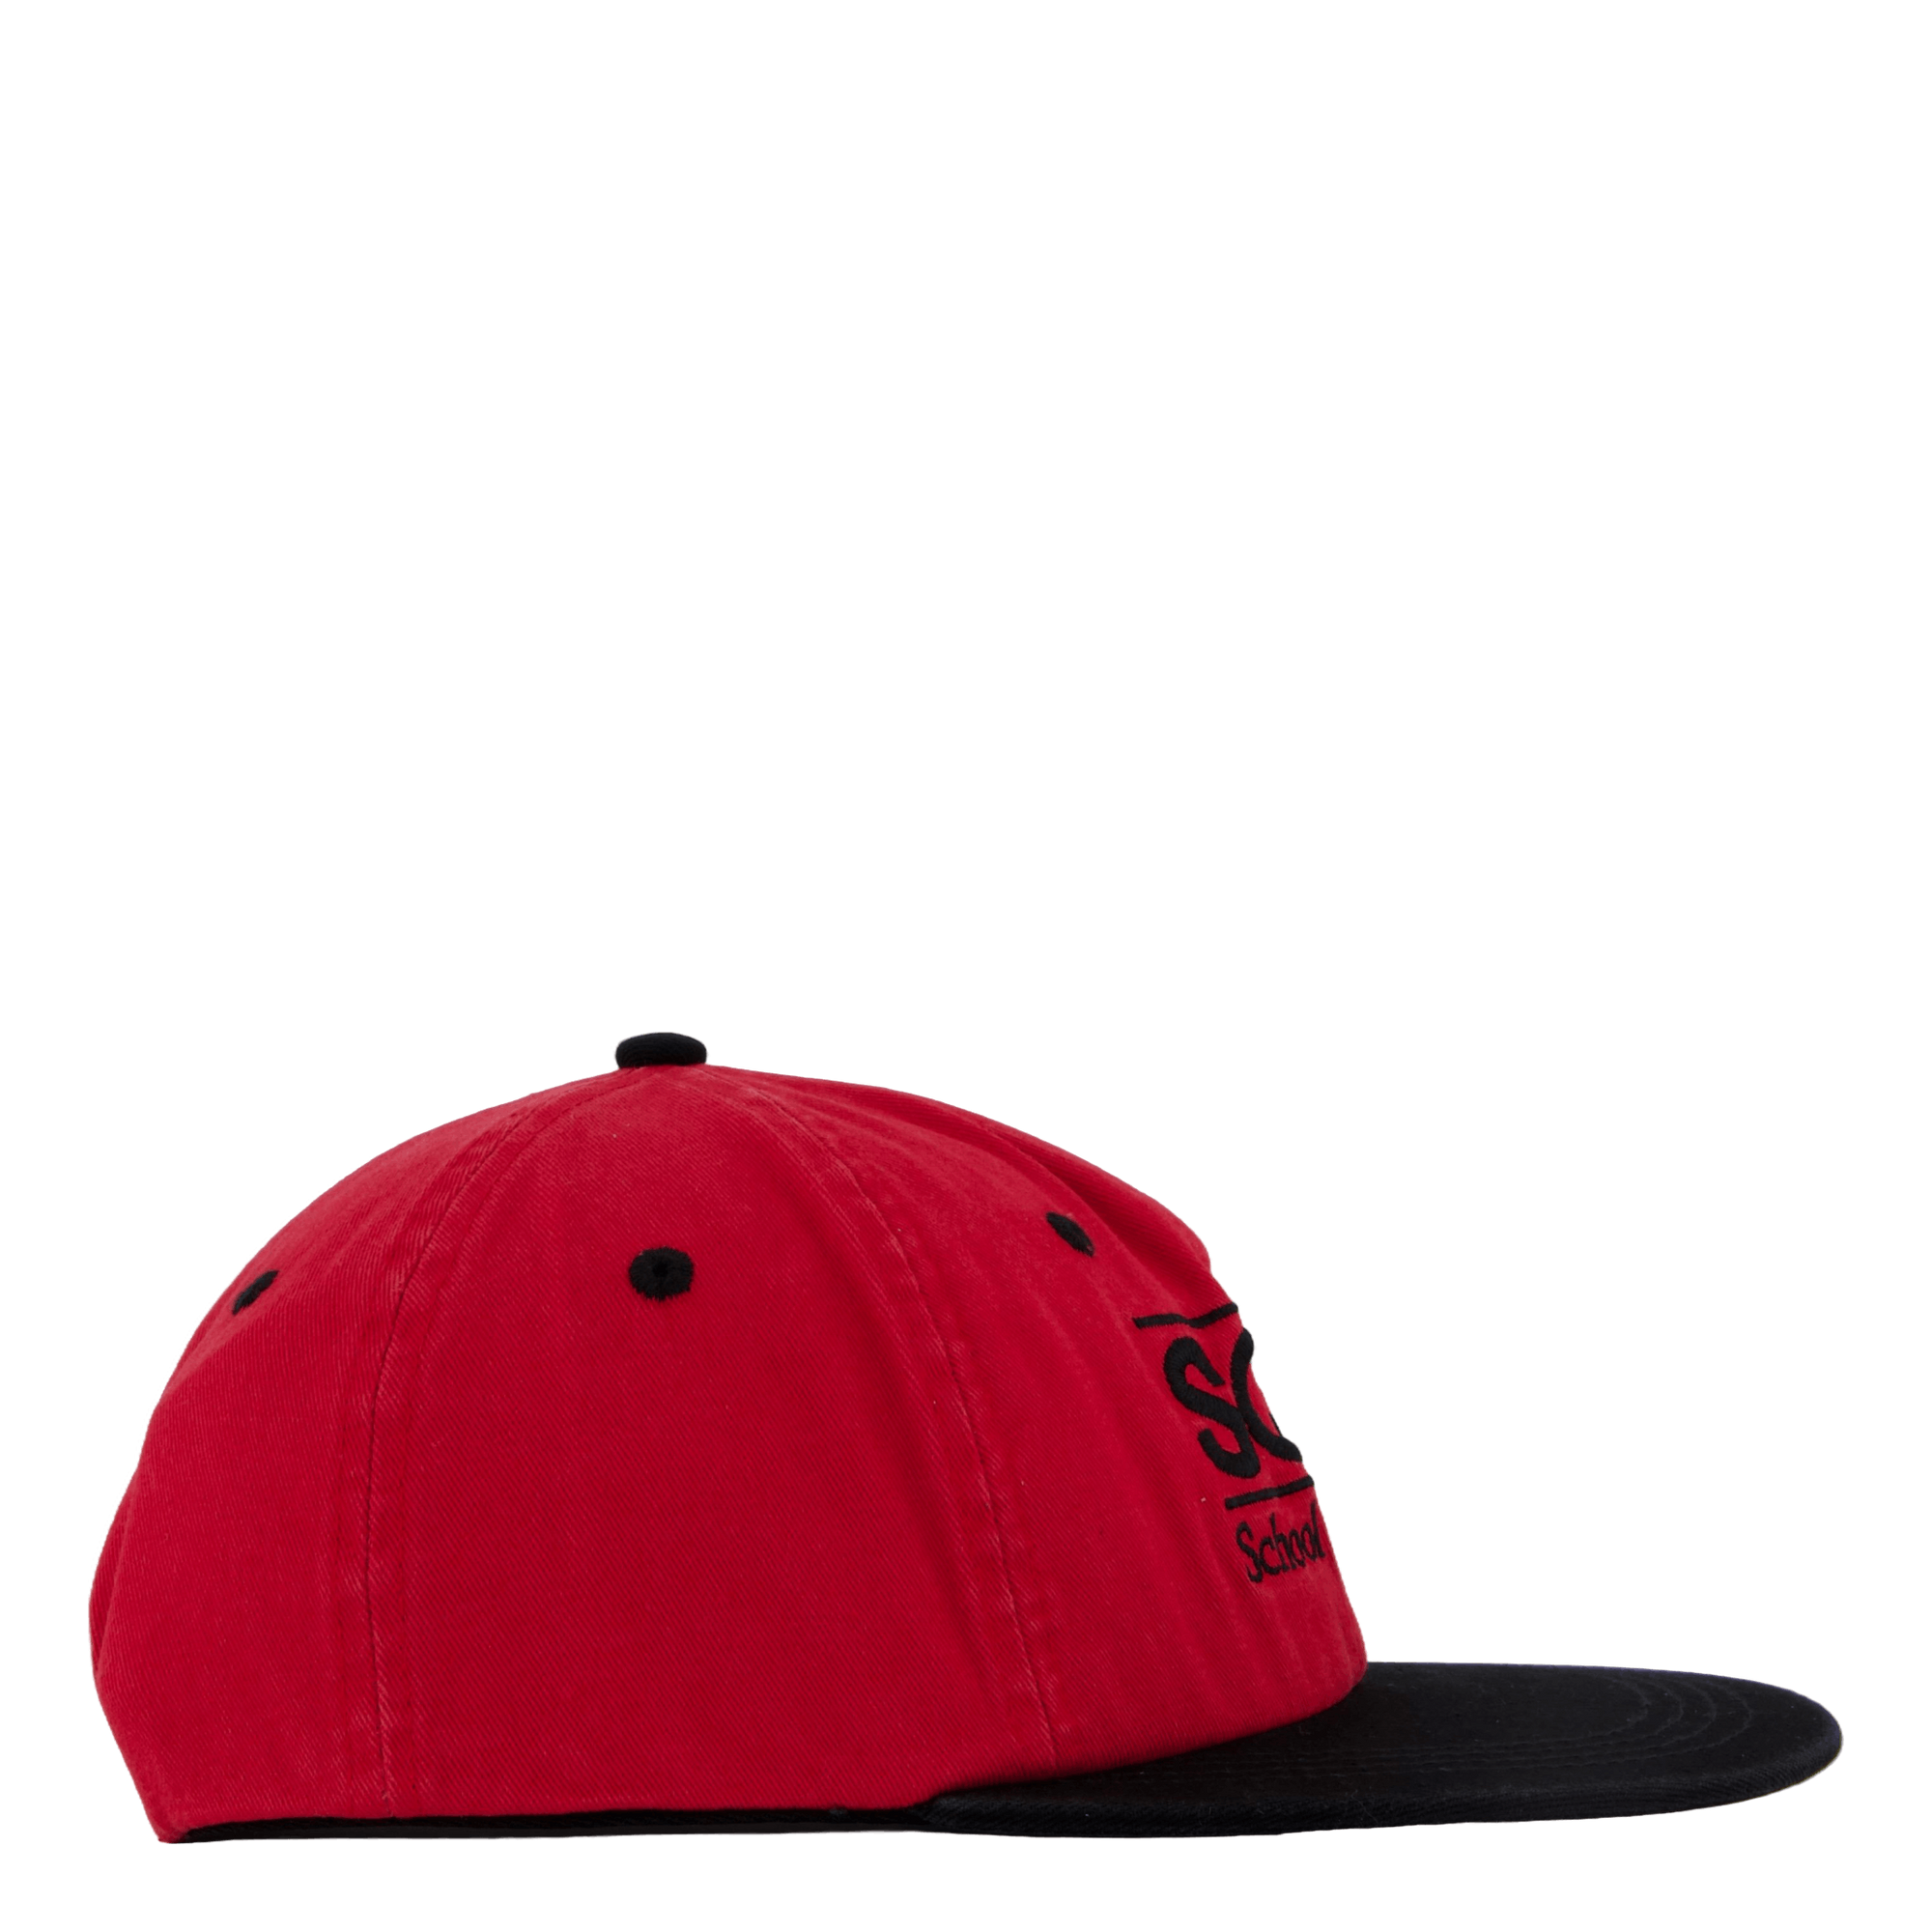 School Of Business Hat Red/black